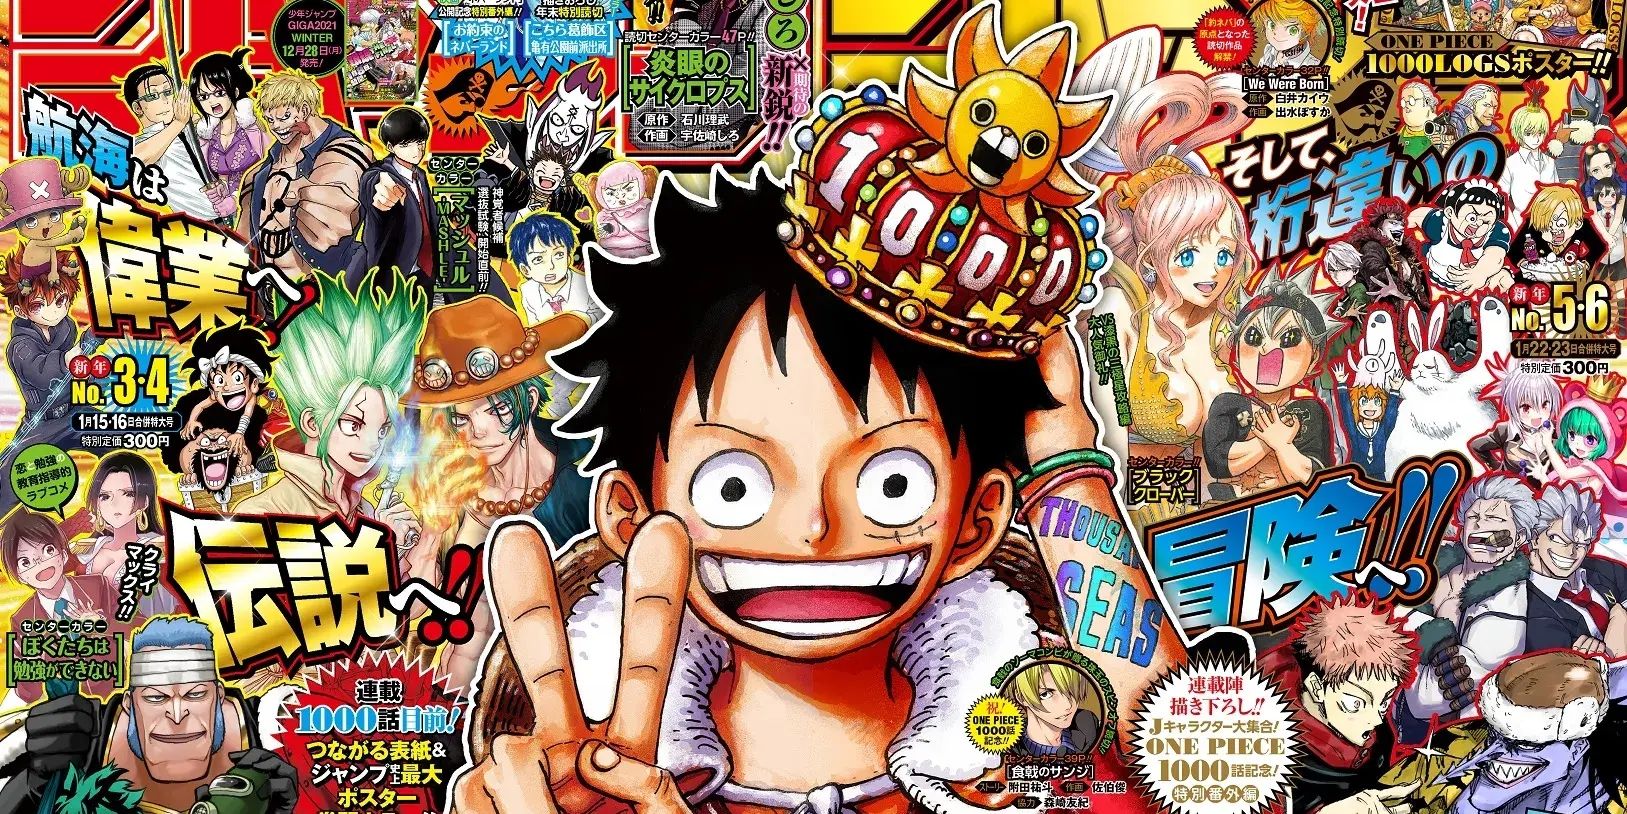 Luffy on the cover of Weekly Shonen Jump